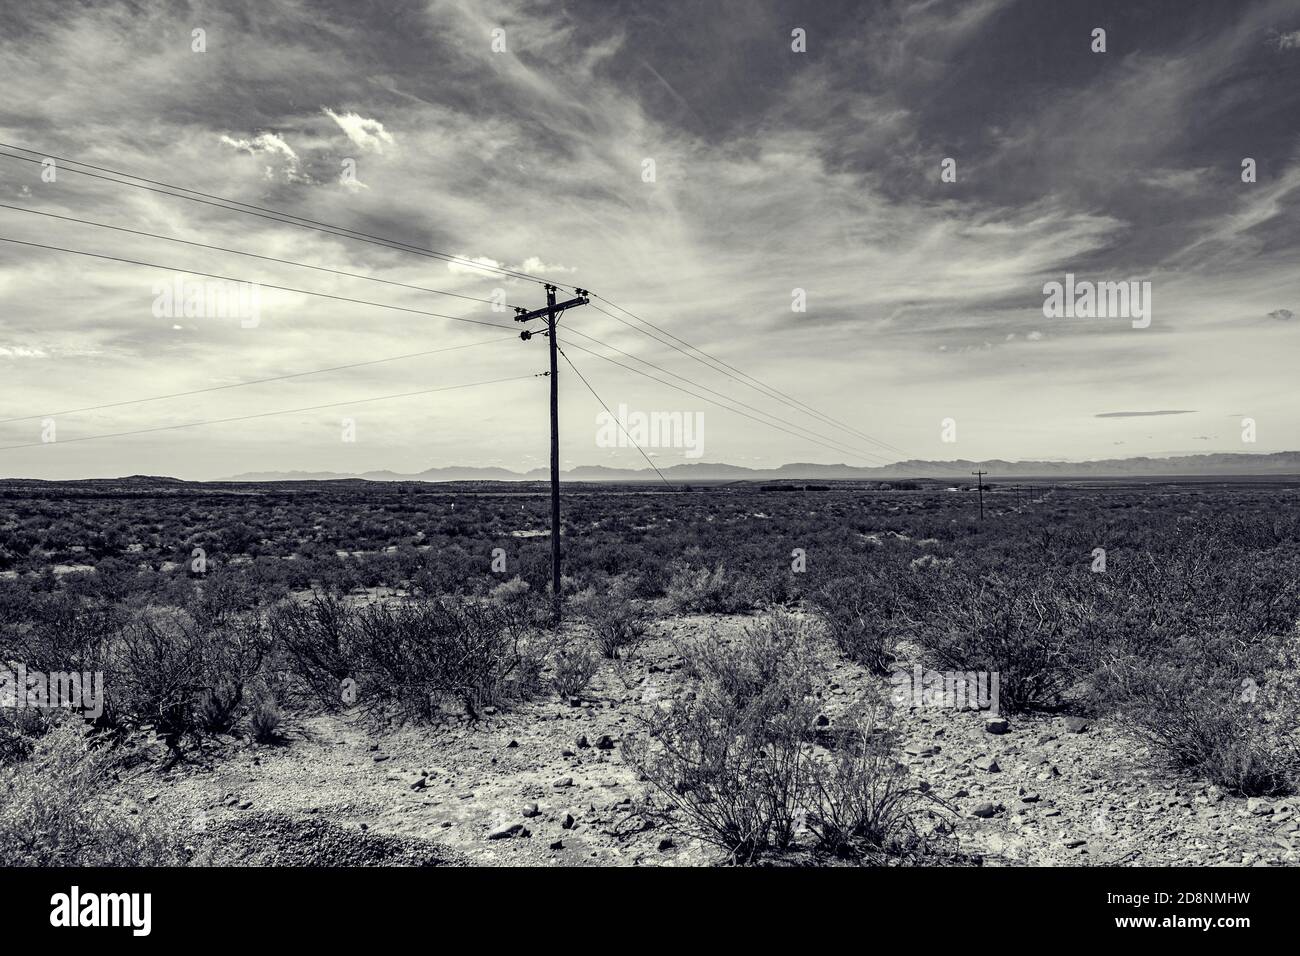 Black and white filter on southwest desert in New Mexico with mountains in the distance and electoral pole in the foreground Stock Photo